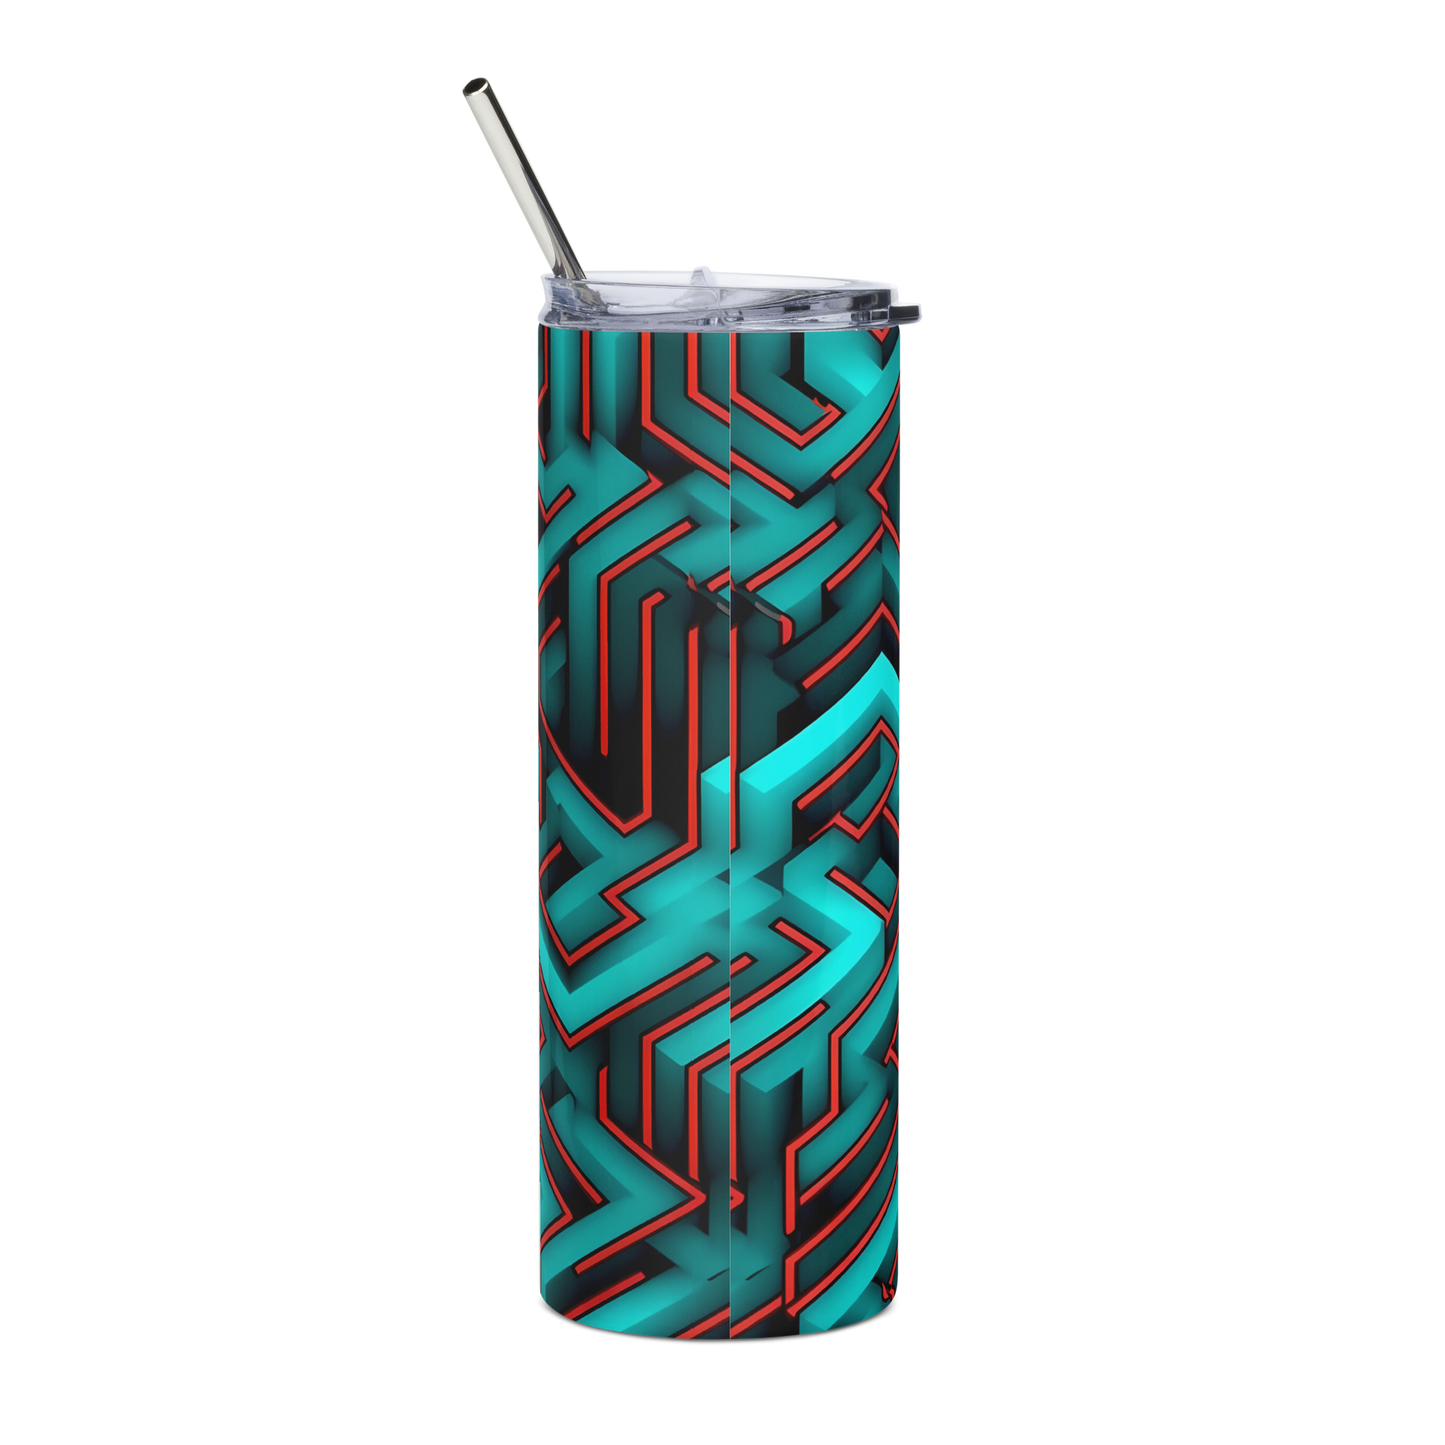 3D Maze Illusion | 3D Patterns | Stainless Steel Tumbler - #2